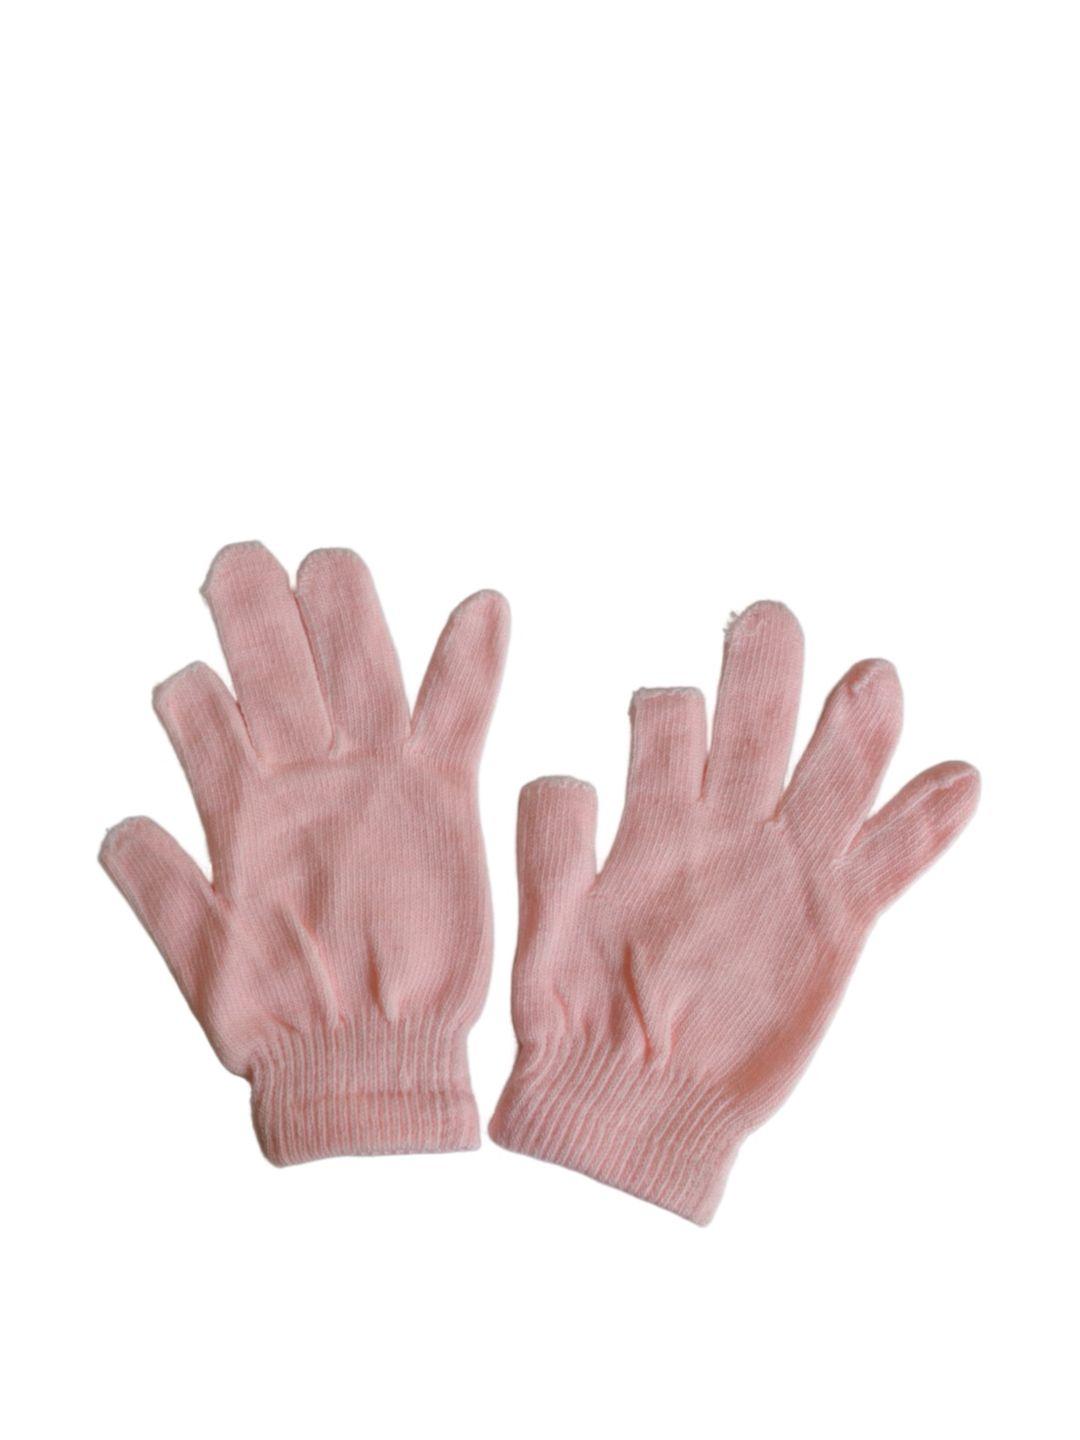 tipy tipy tap girls two finger cut school gloves